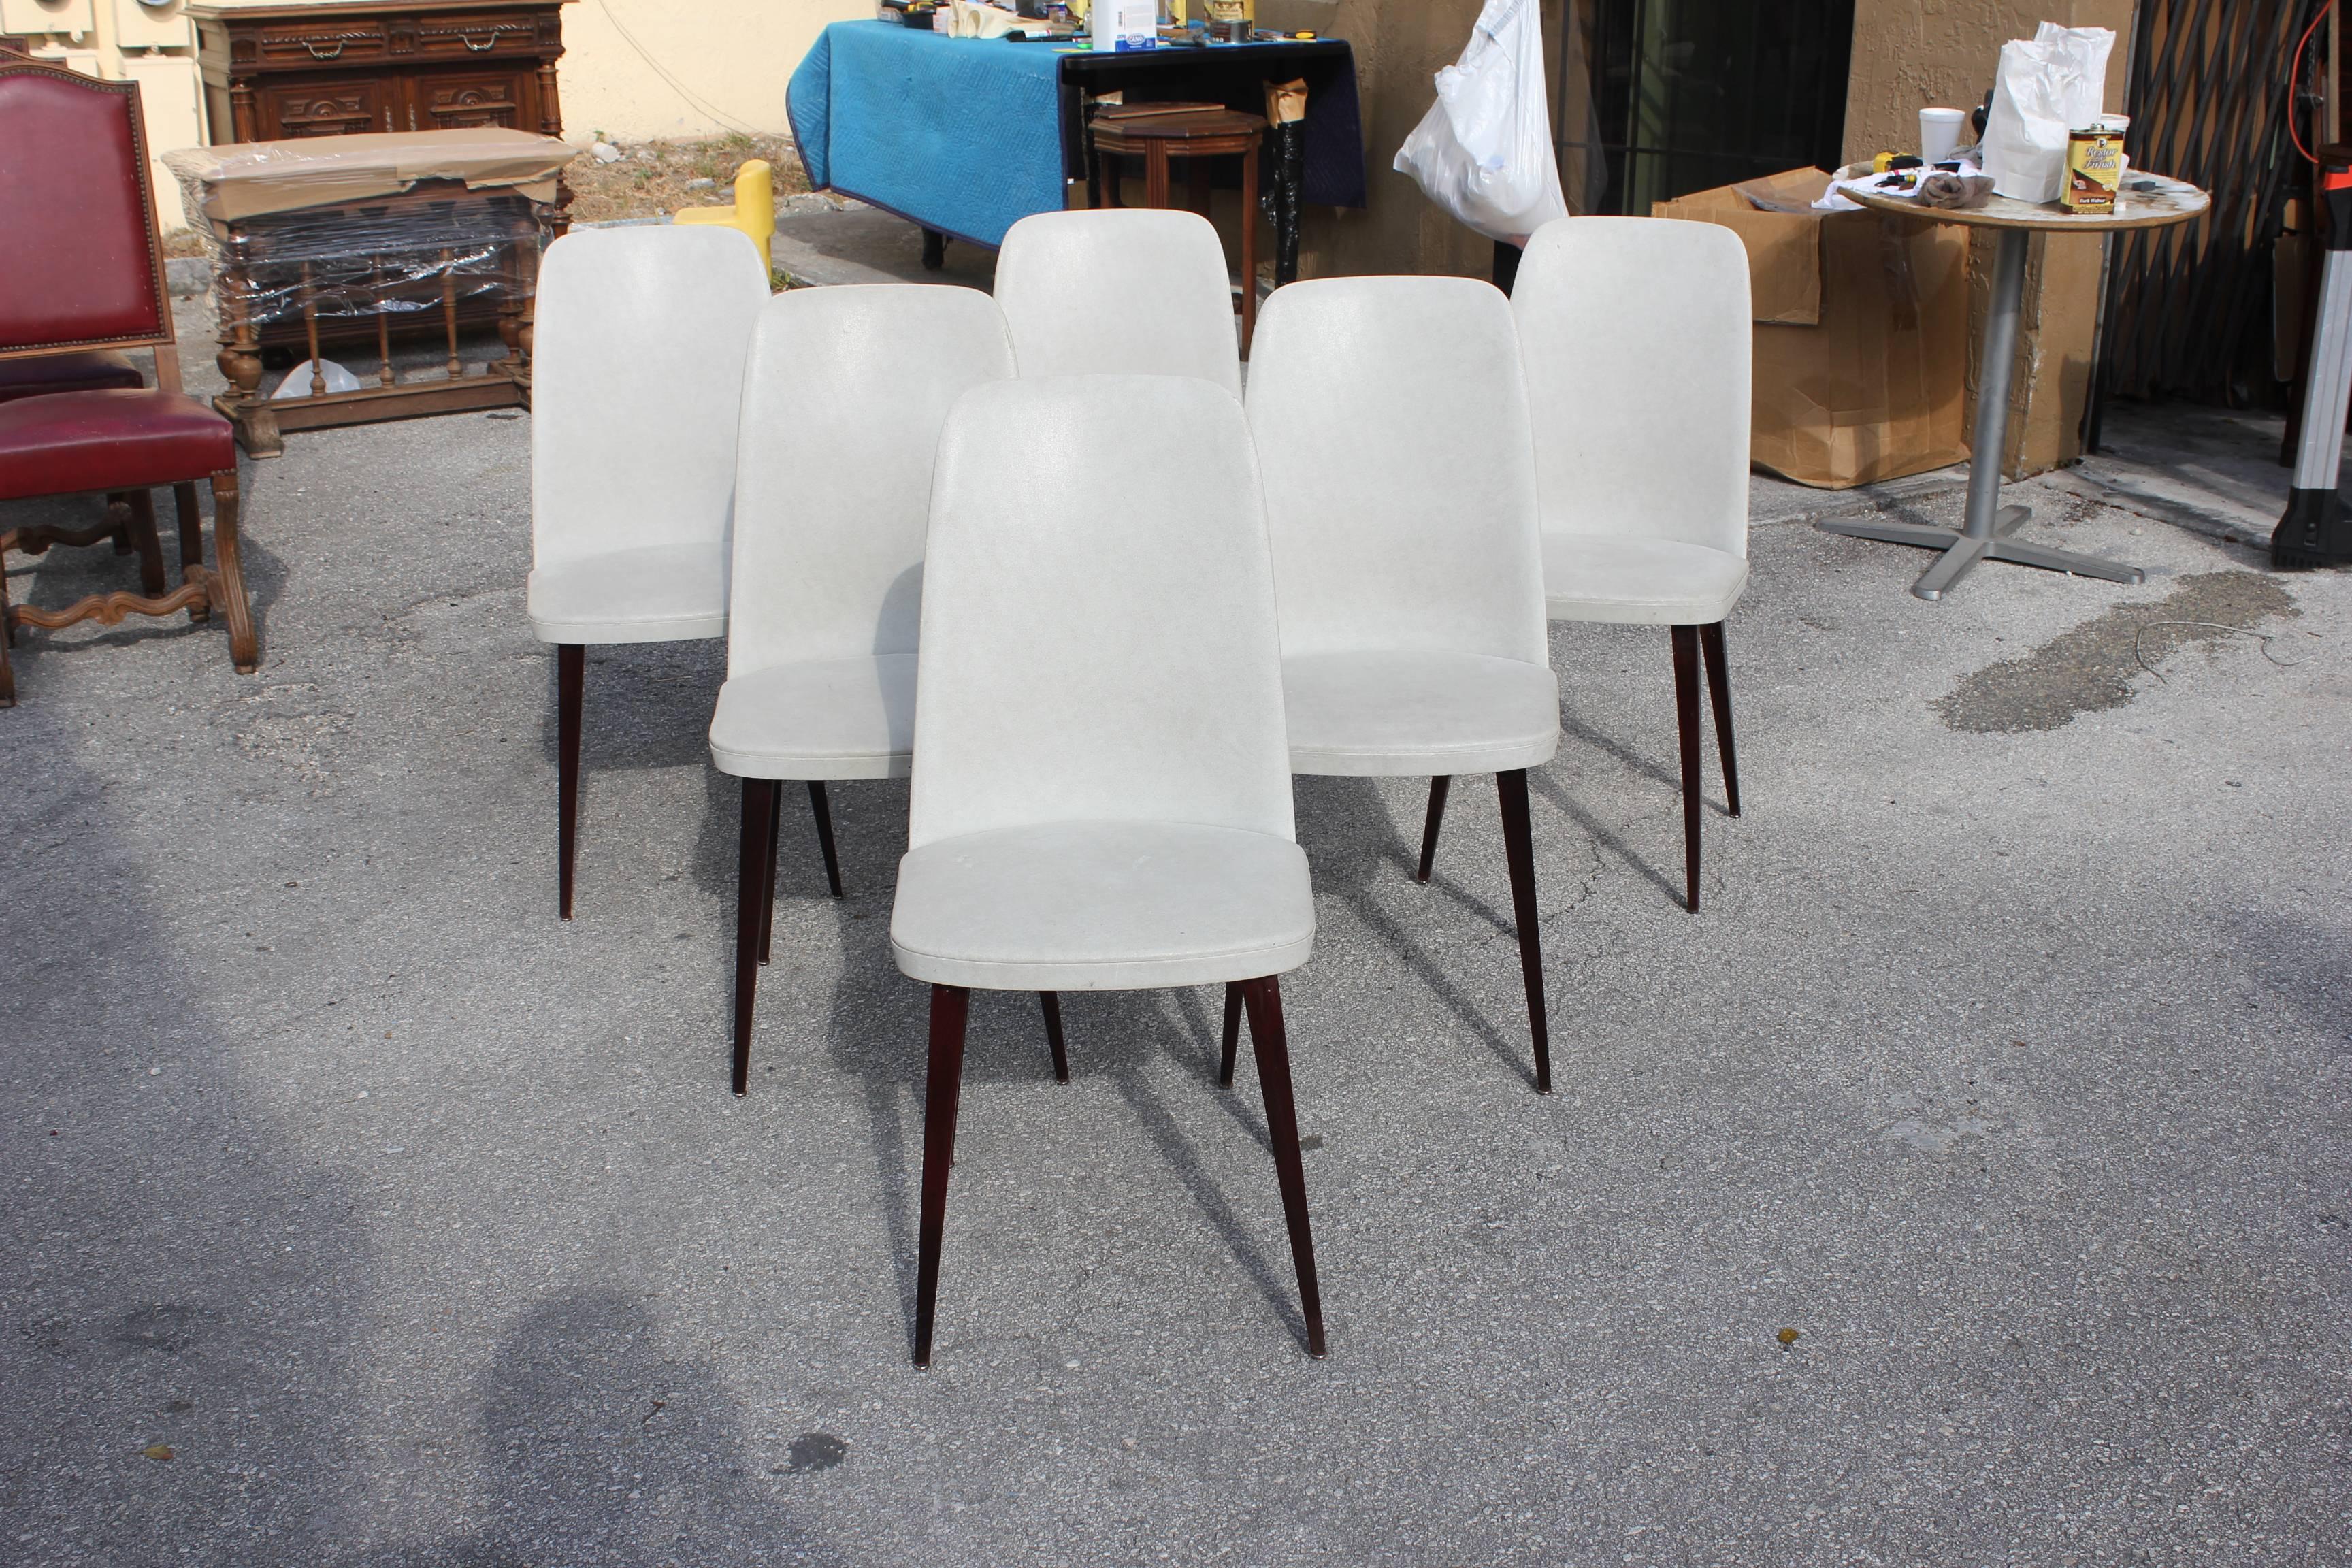 Set of six French Art Deco dining chairs solid mahogany, chair frames are in excellent condition, vinyl all around the top. Reupholstery is vinyl recommended for all six dining chairs, but the color of the vinyl are beautiful, circa 1940s. Beautiful